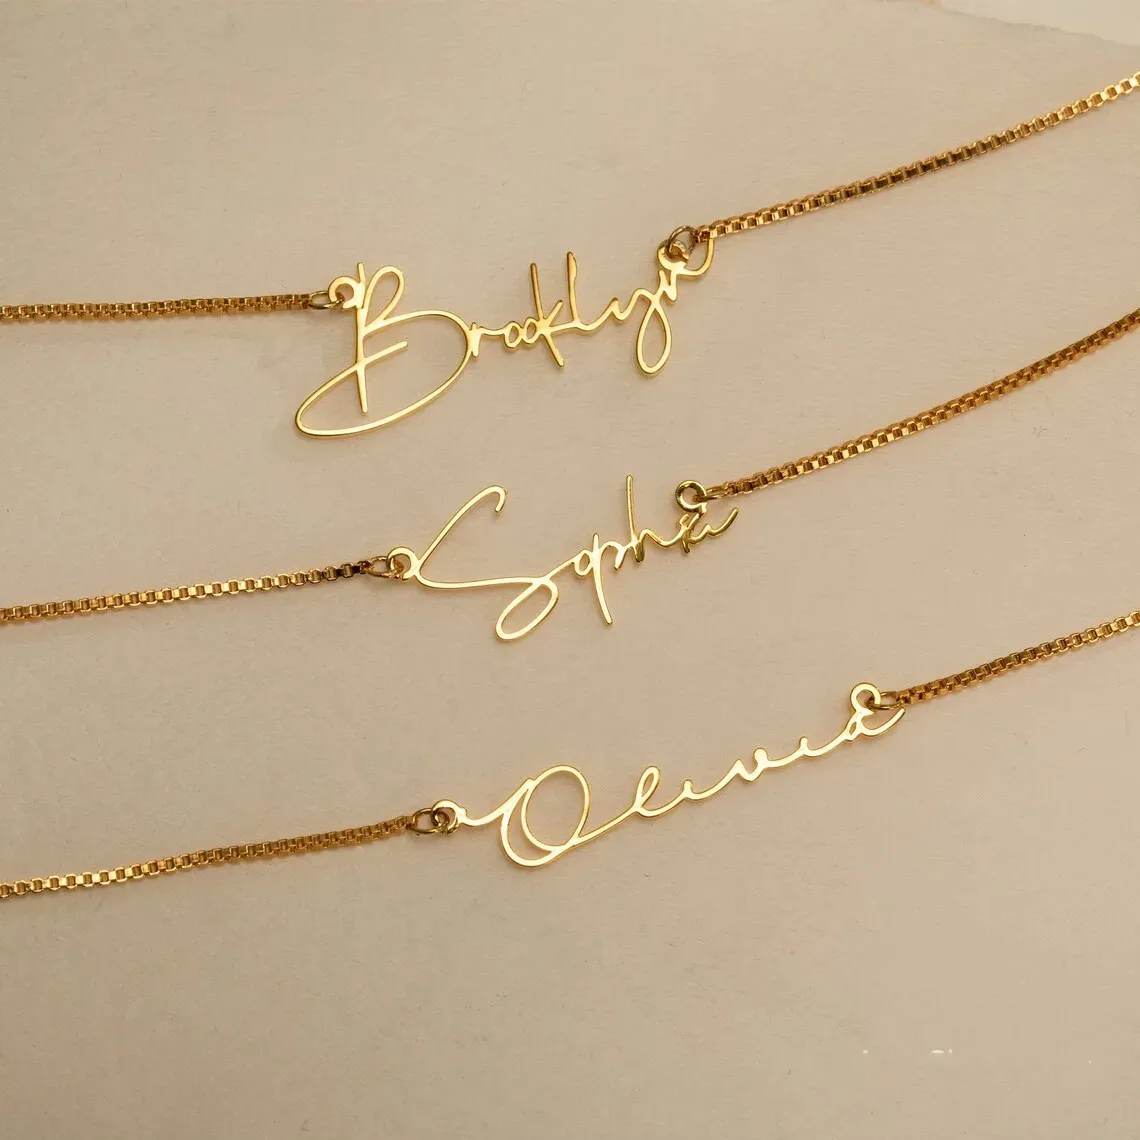 Personalised Gold Name Necklace with Box Chain Custom Name Necklace Handmade Jewelry Personalised Birthday Gift for Her Mom